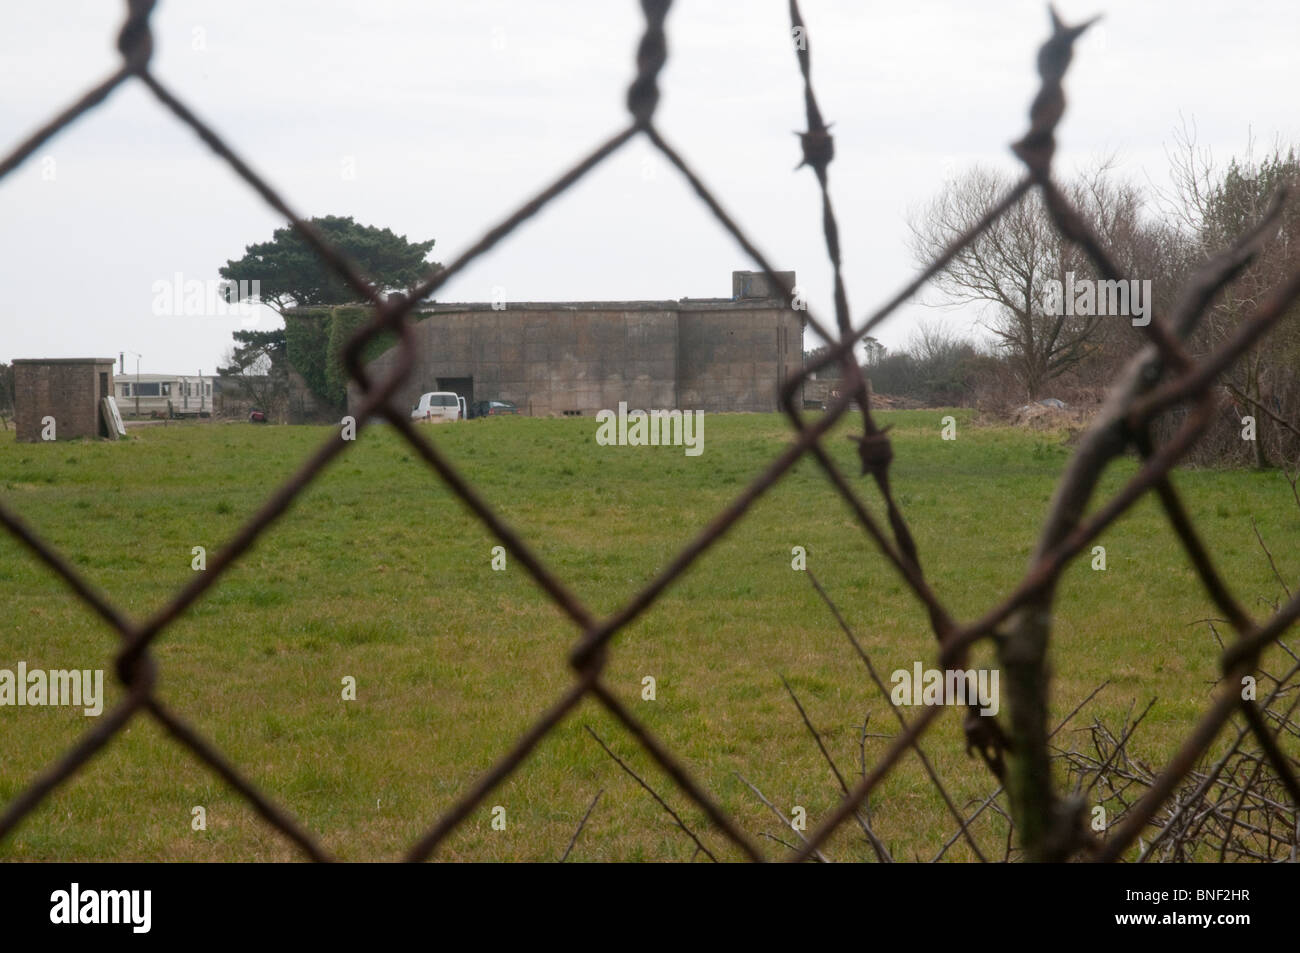 Old 1960s nuclear bunker, now the home of Lizard Ales brewery, in Cornwall, viewed through the old, rusty security fence. Stock Photo